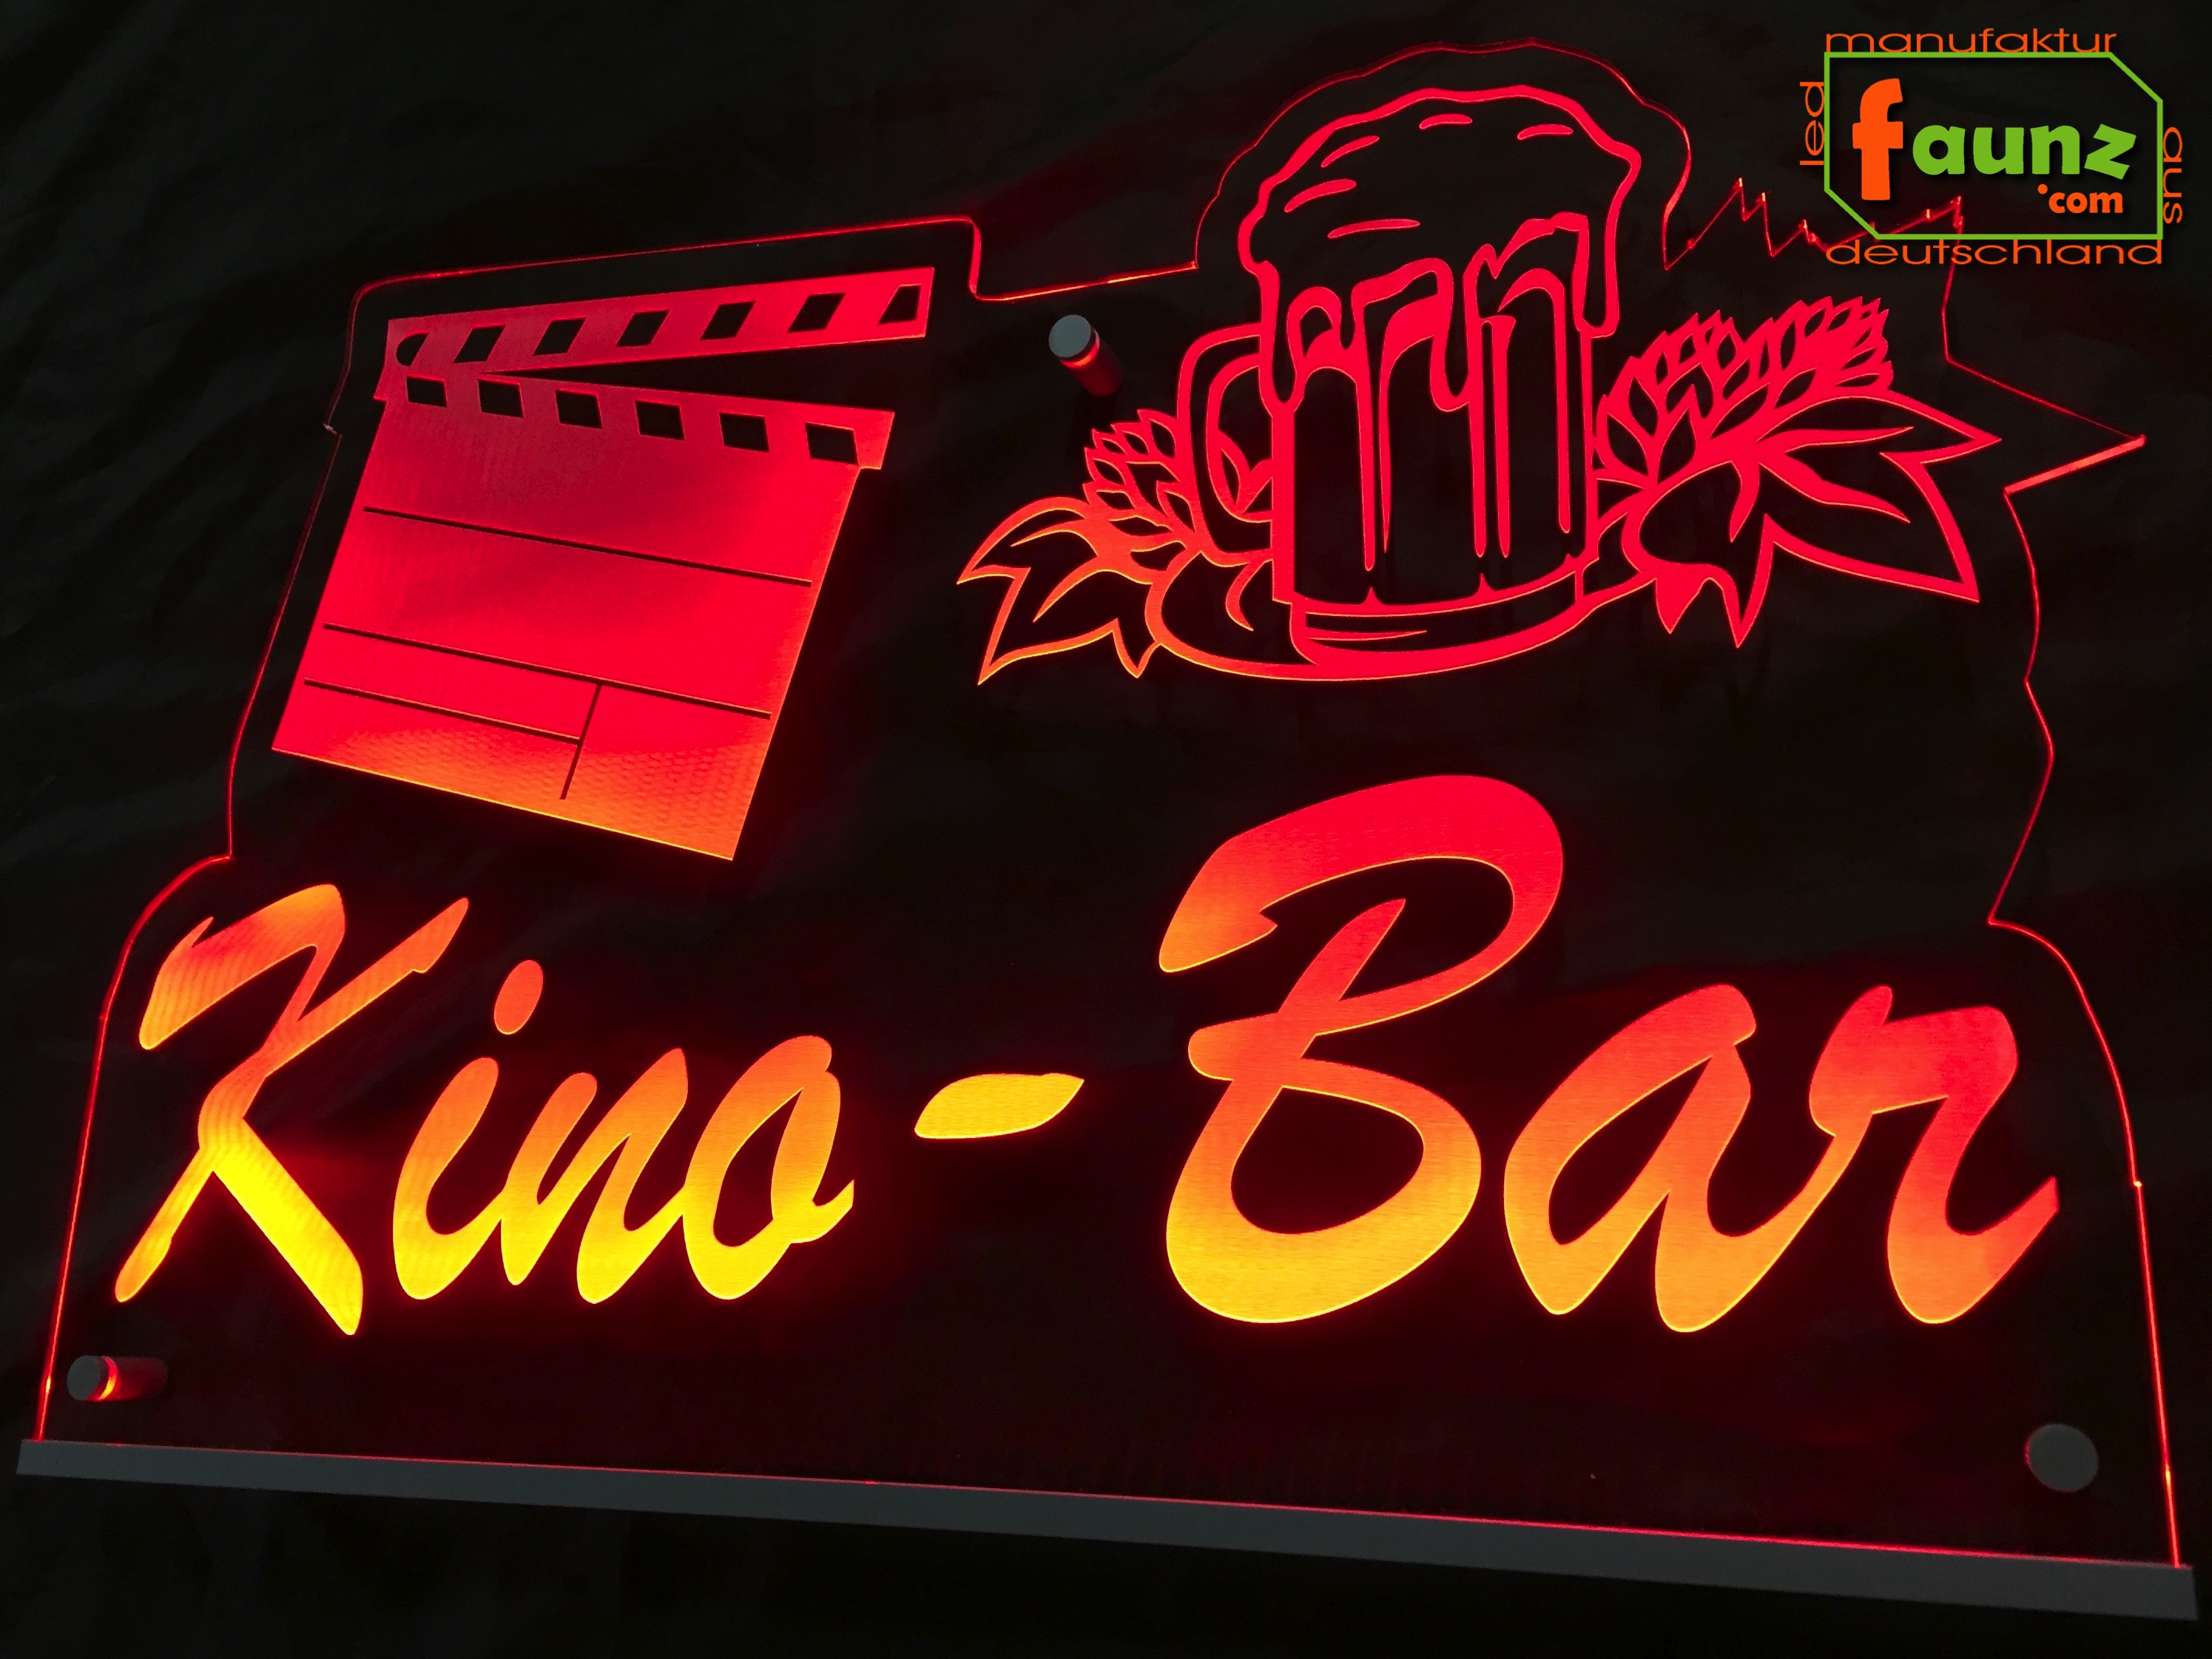 https://www.faunz.com/images/product_images/original_images/kino-bar_rot-1.jpg